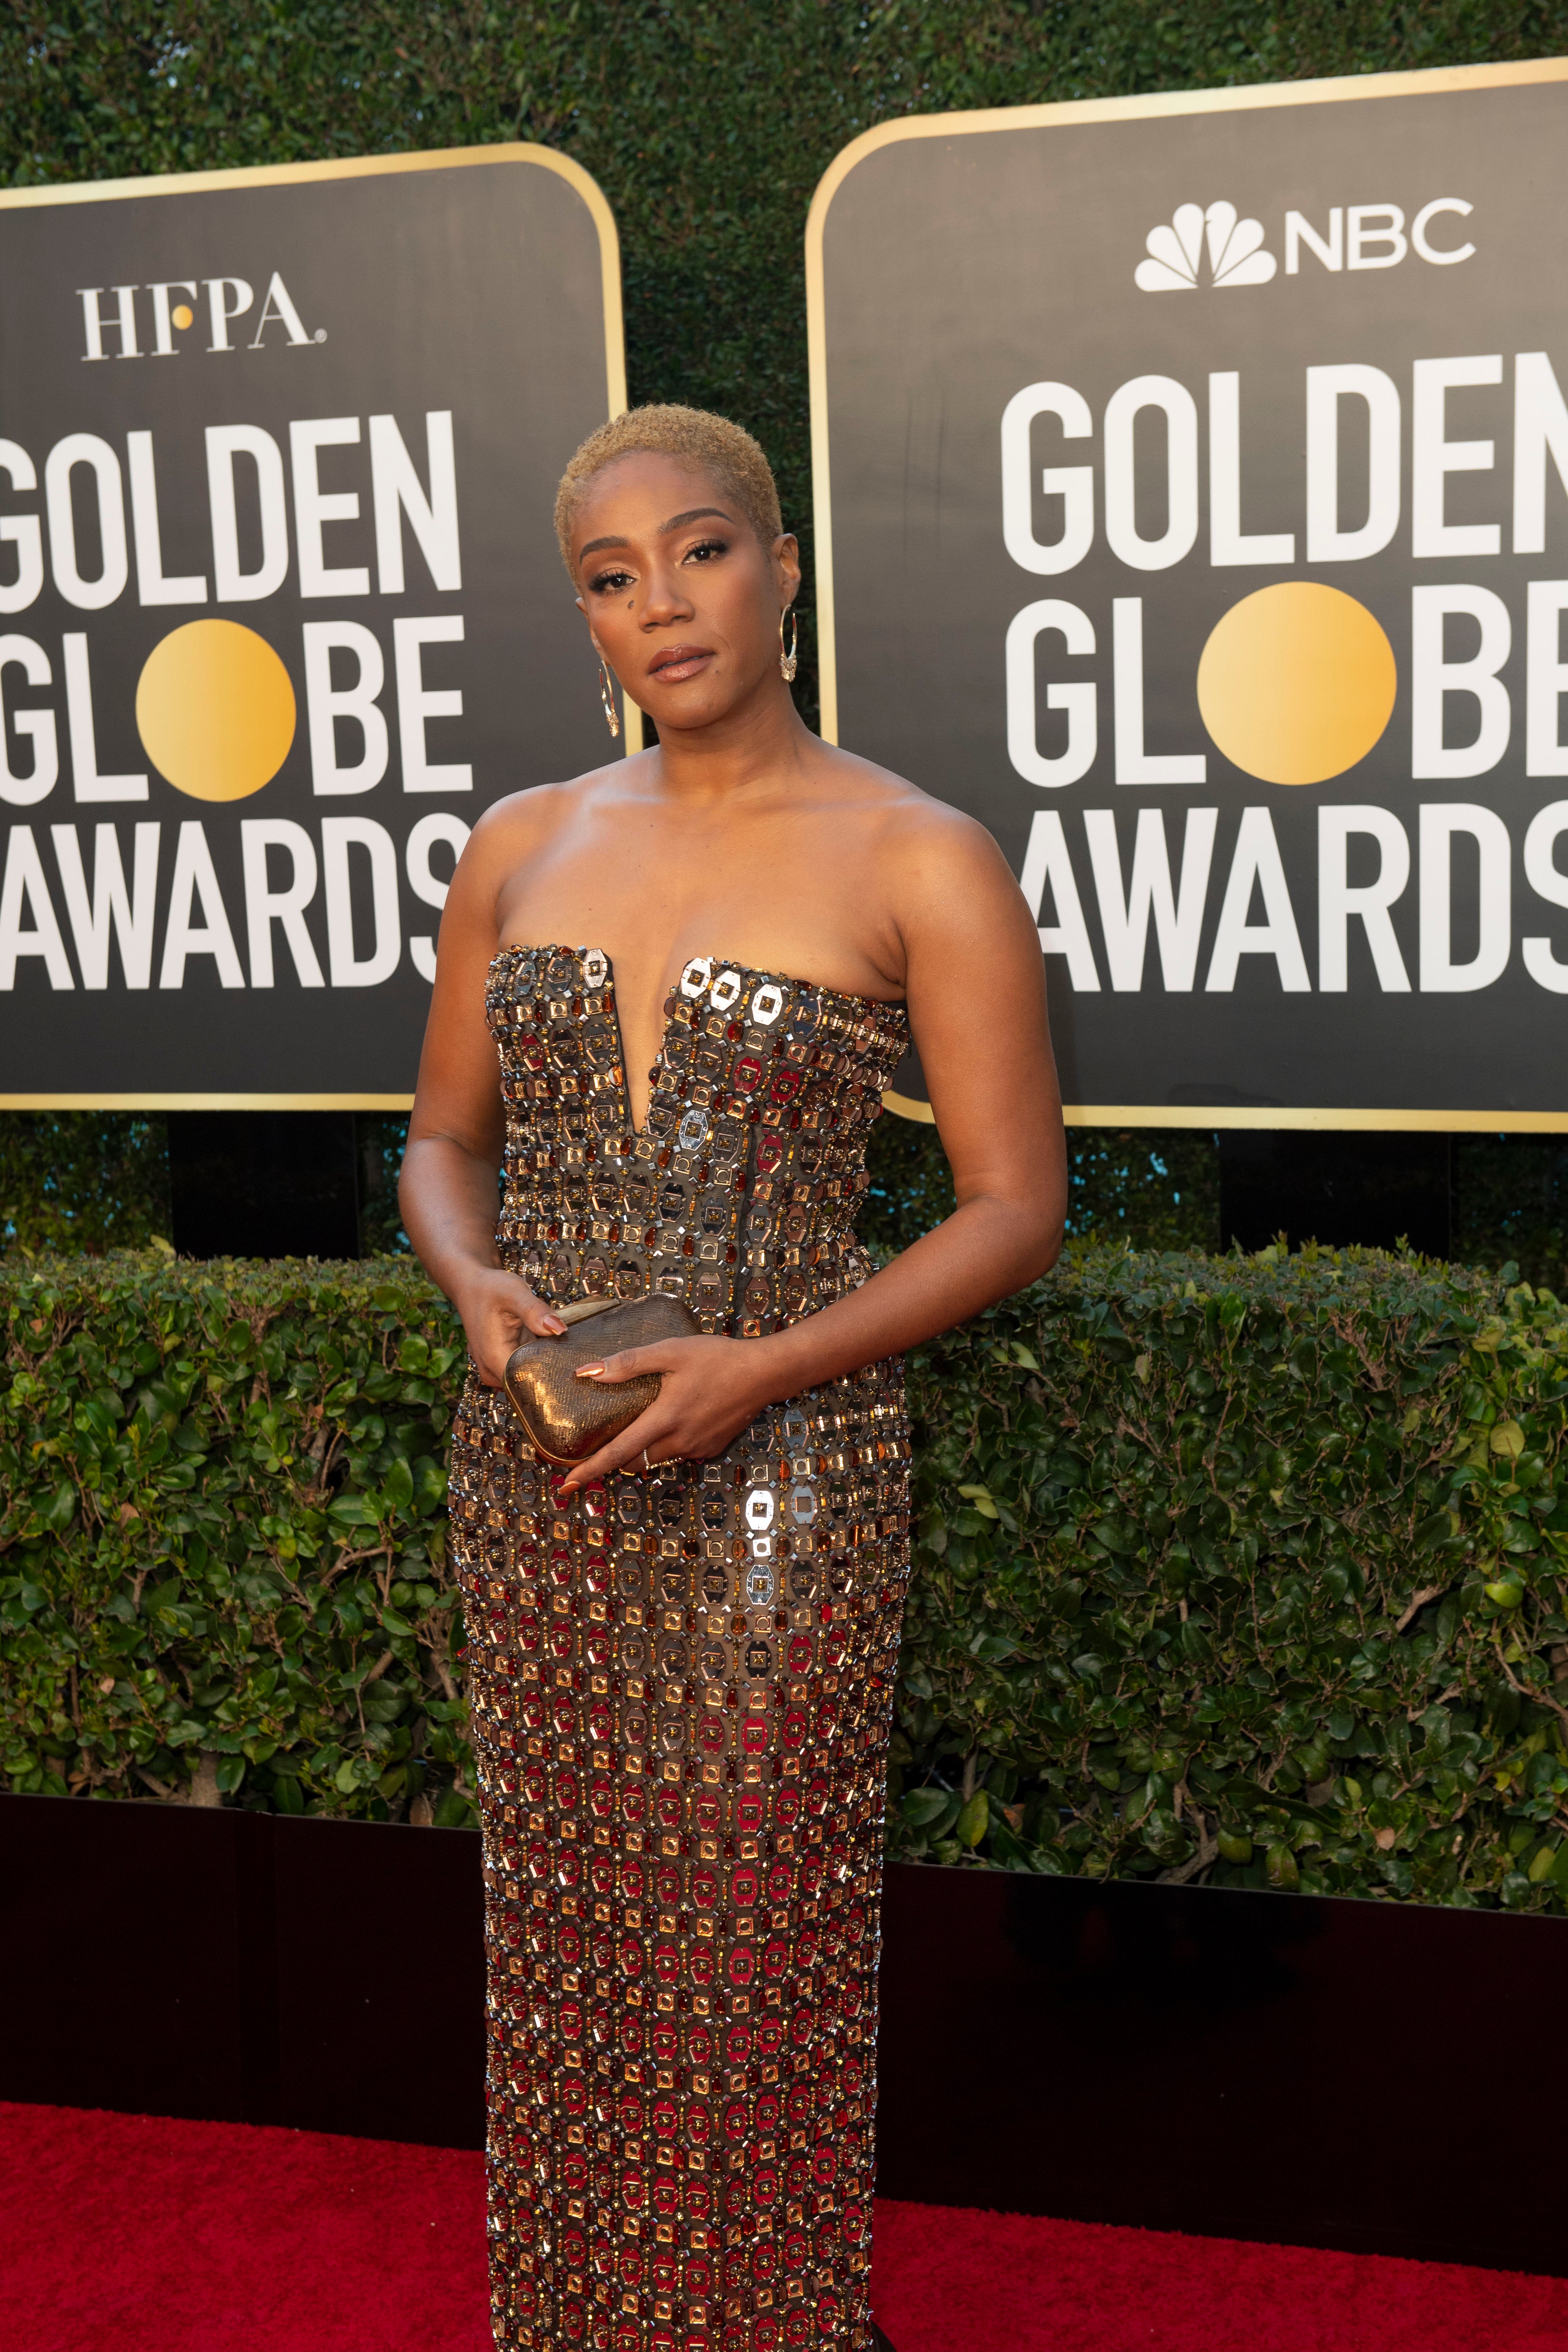 Tiffany Haddish arrives at the 78th Annual Golden Globe Awards at the Beverly Hilton in Beverly Hills, CA on Sunday, February 28, 2021.